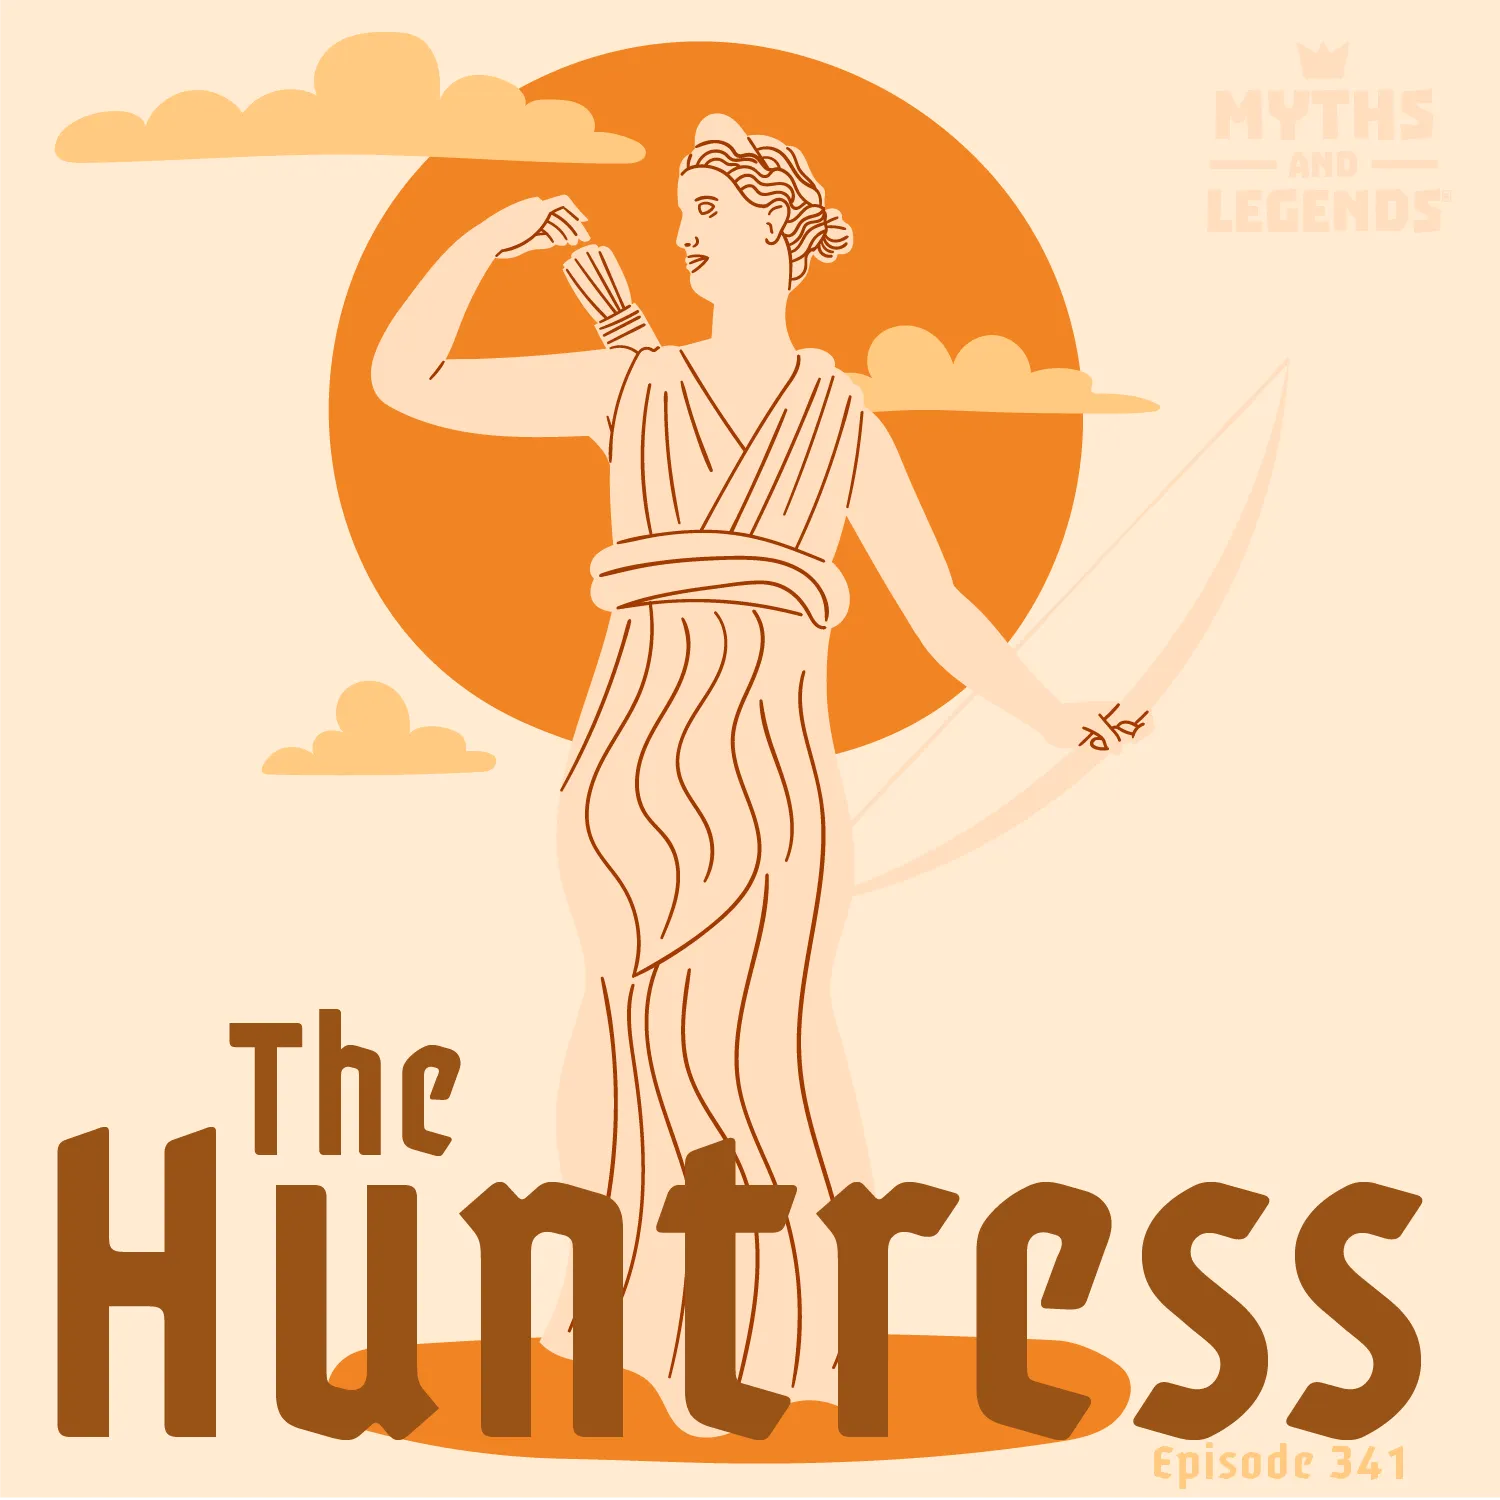 An illustration in a monochrome orange palette depicts a classical female figure, "The Huntress", standing with a sense of poise and grace. She is dressed in a flowing Grecian robe and holds a bow in her left hand while reaching for an arrow with her right. Her hair is styled in an ancient Greek manner. Behind her, a large, stylized sun with clouds creates a dramatic backdrop. The title "The Huntress" is in bold, block letters at the bottom.